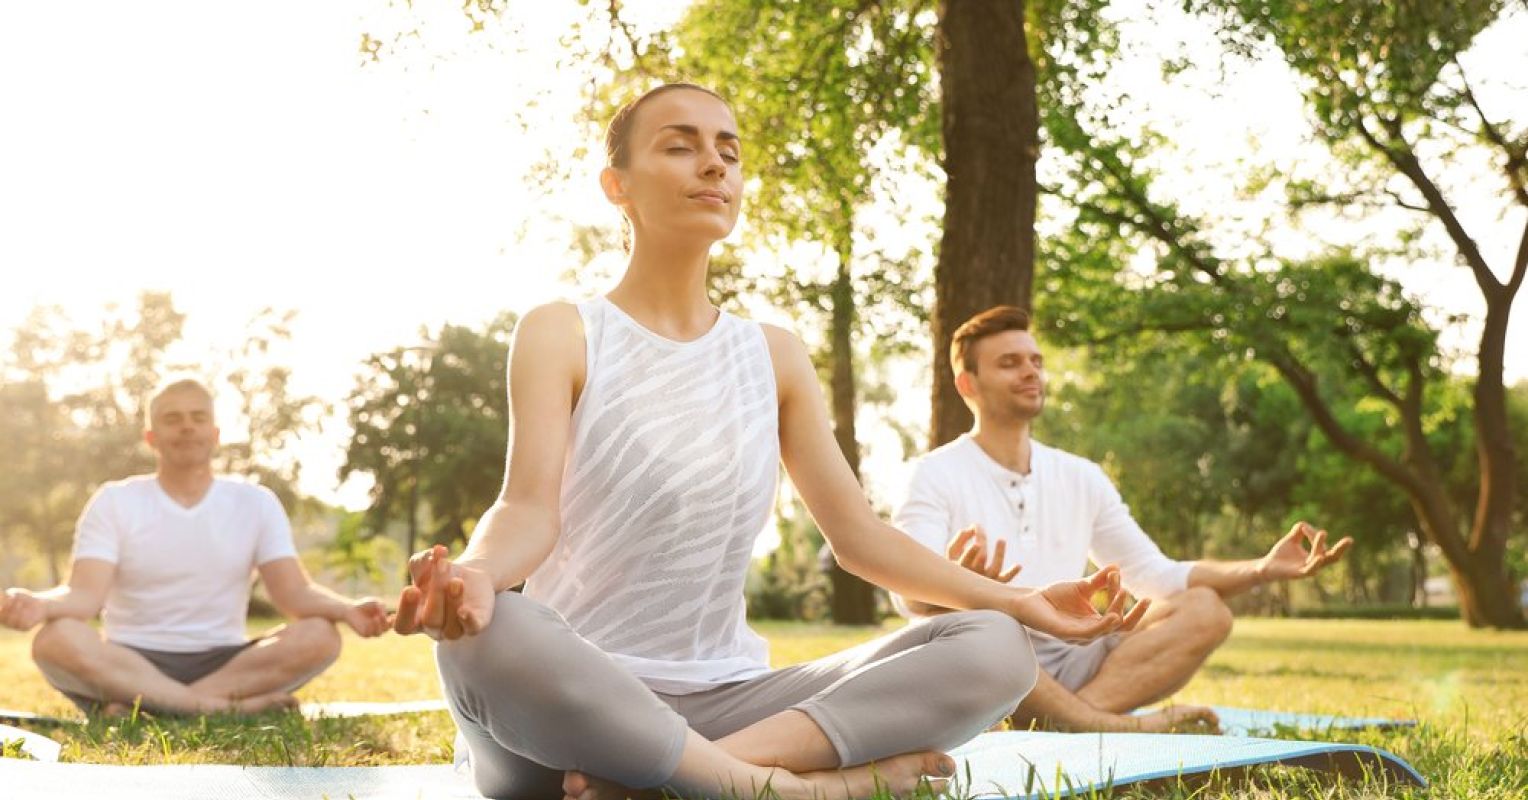 New Research Shows Yoga Reduces Stress and Improves Well-Being ...